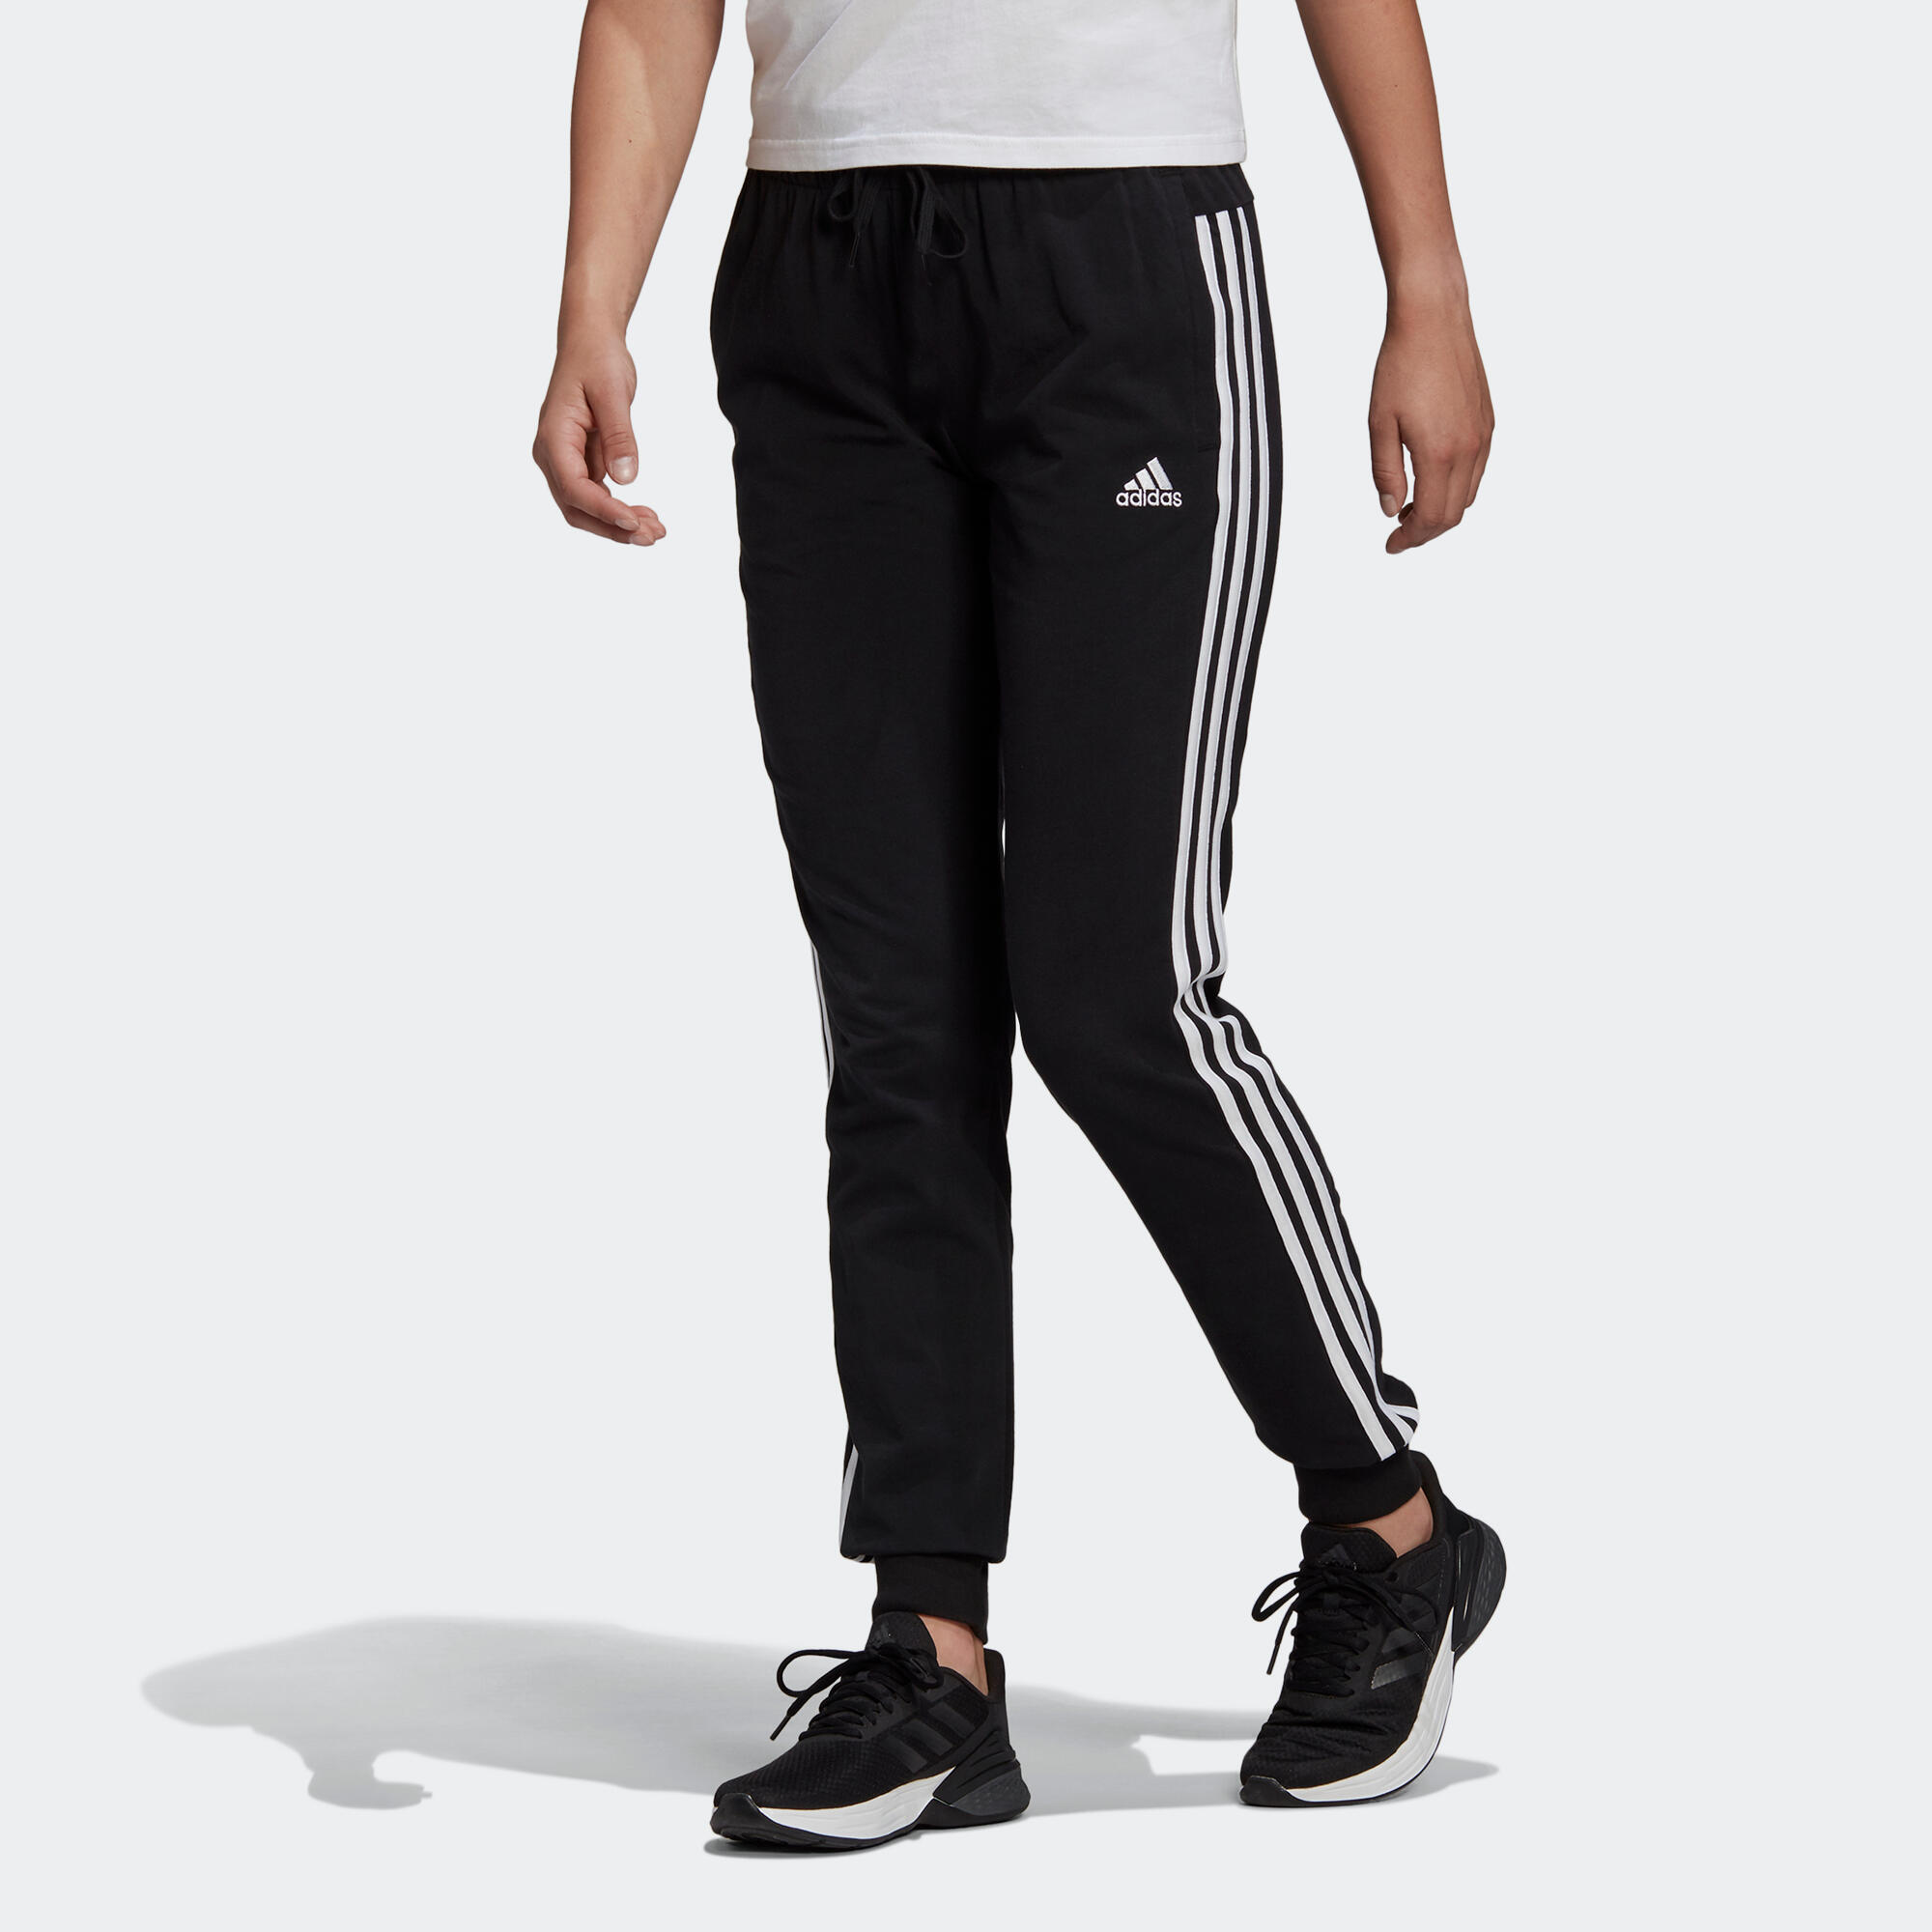 Adidas Women's Cotton-rich Fitted Jogging Fitness Bottoms 3 Stripes - Black